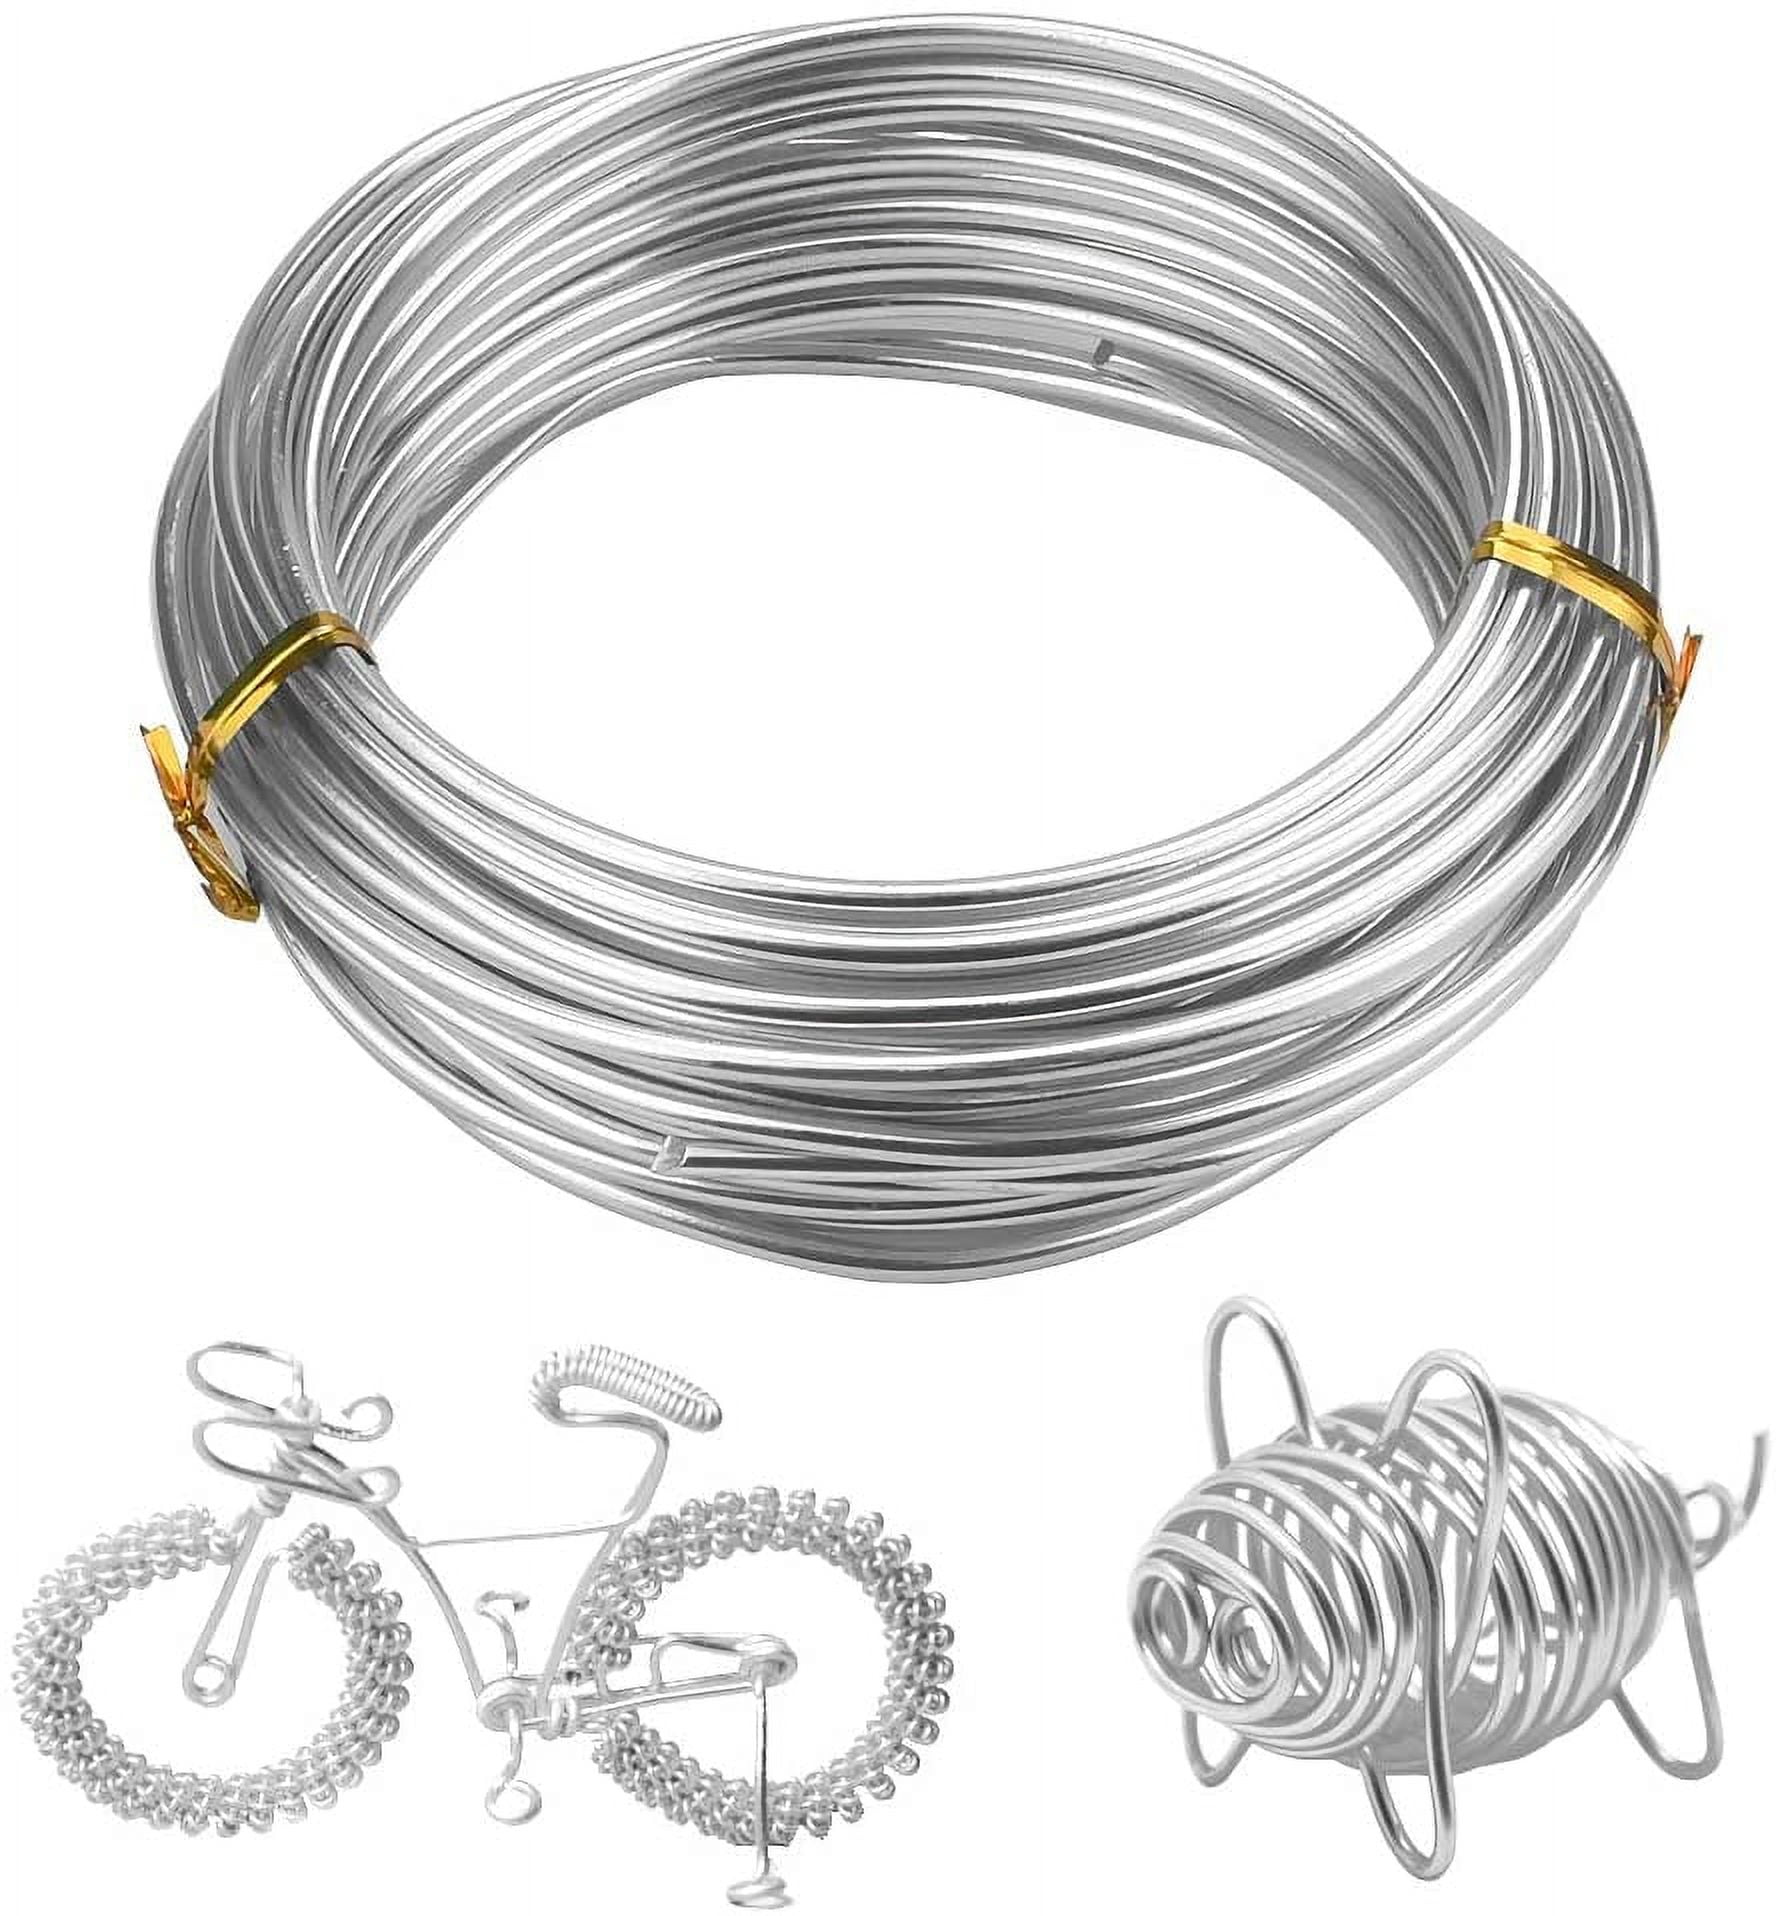 1m Silver Alloy Wire Crafts Braided Metal DIY Material 0.4-1.6mm Diameter  Multi